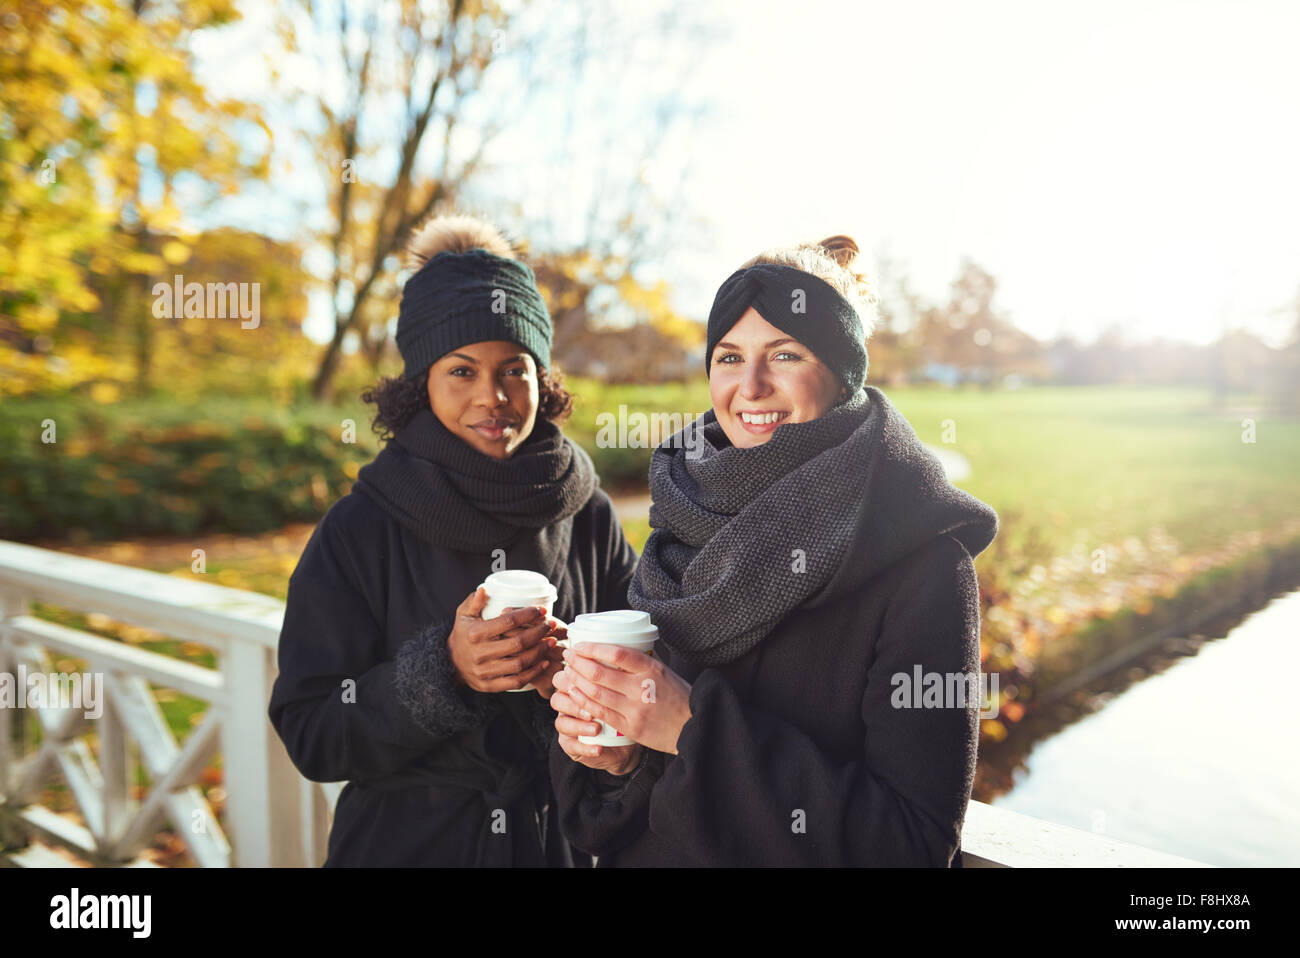 Two young women standing on bridge and holding coffee to go, smiling Stock Photo